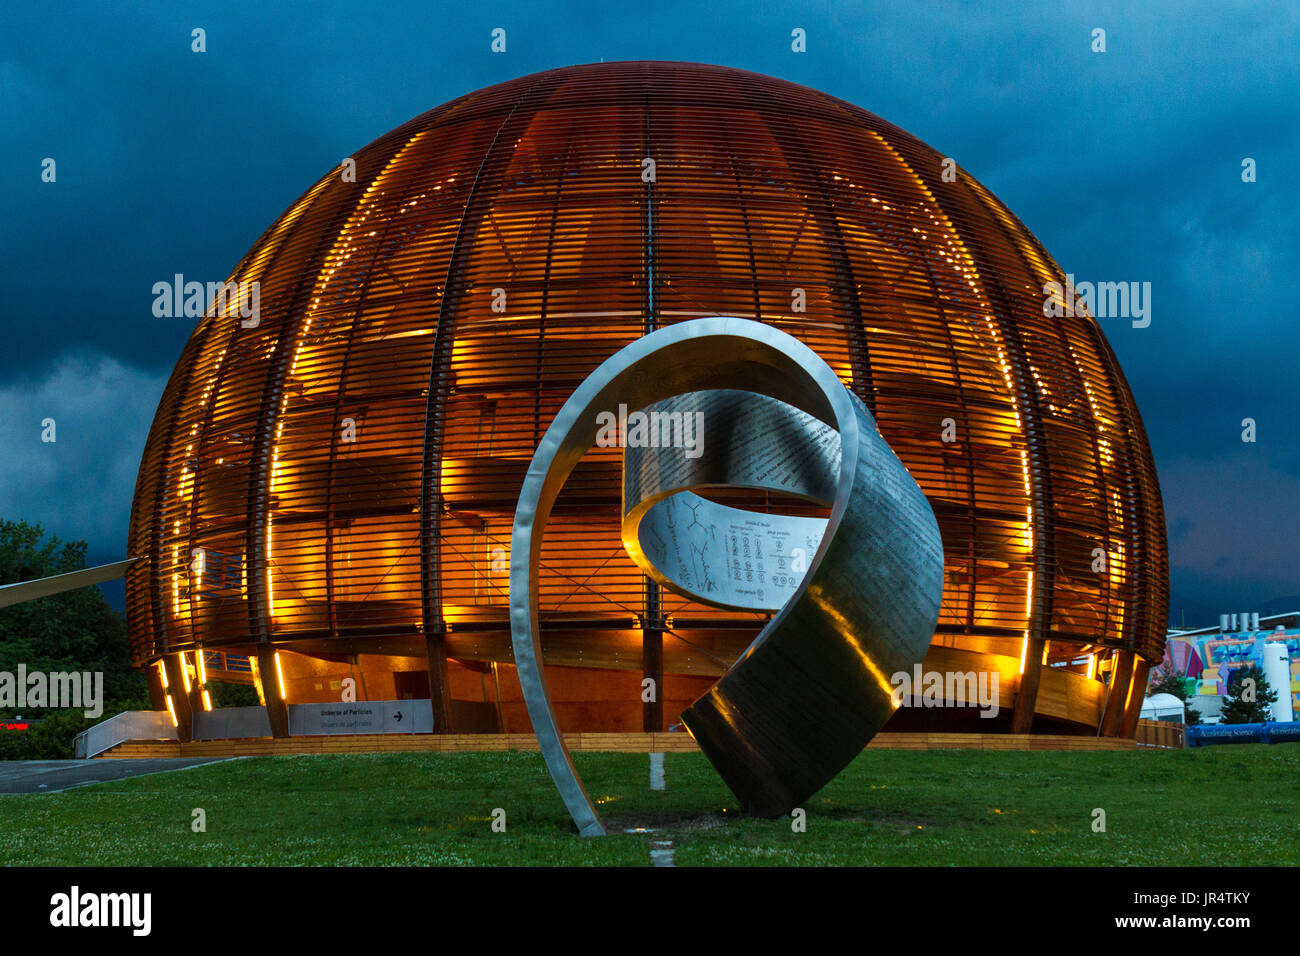 GENEVA, SWITZERLAND - JUNE 8, 2016: The Globe of Science & Innovation in CERN research center, home of Large Hadron Collider (LHC). The sculpture was Stock Photo